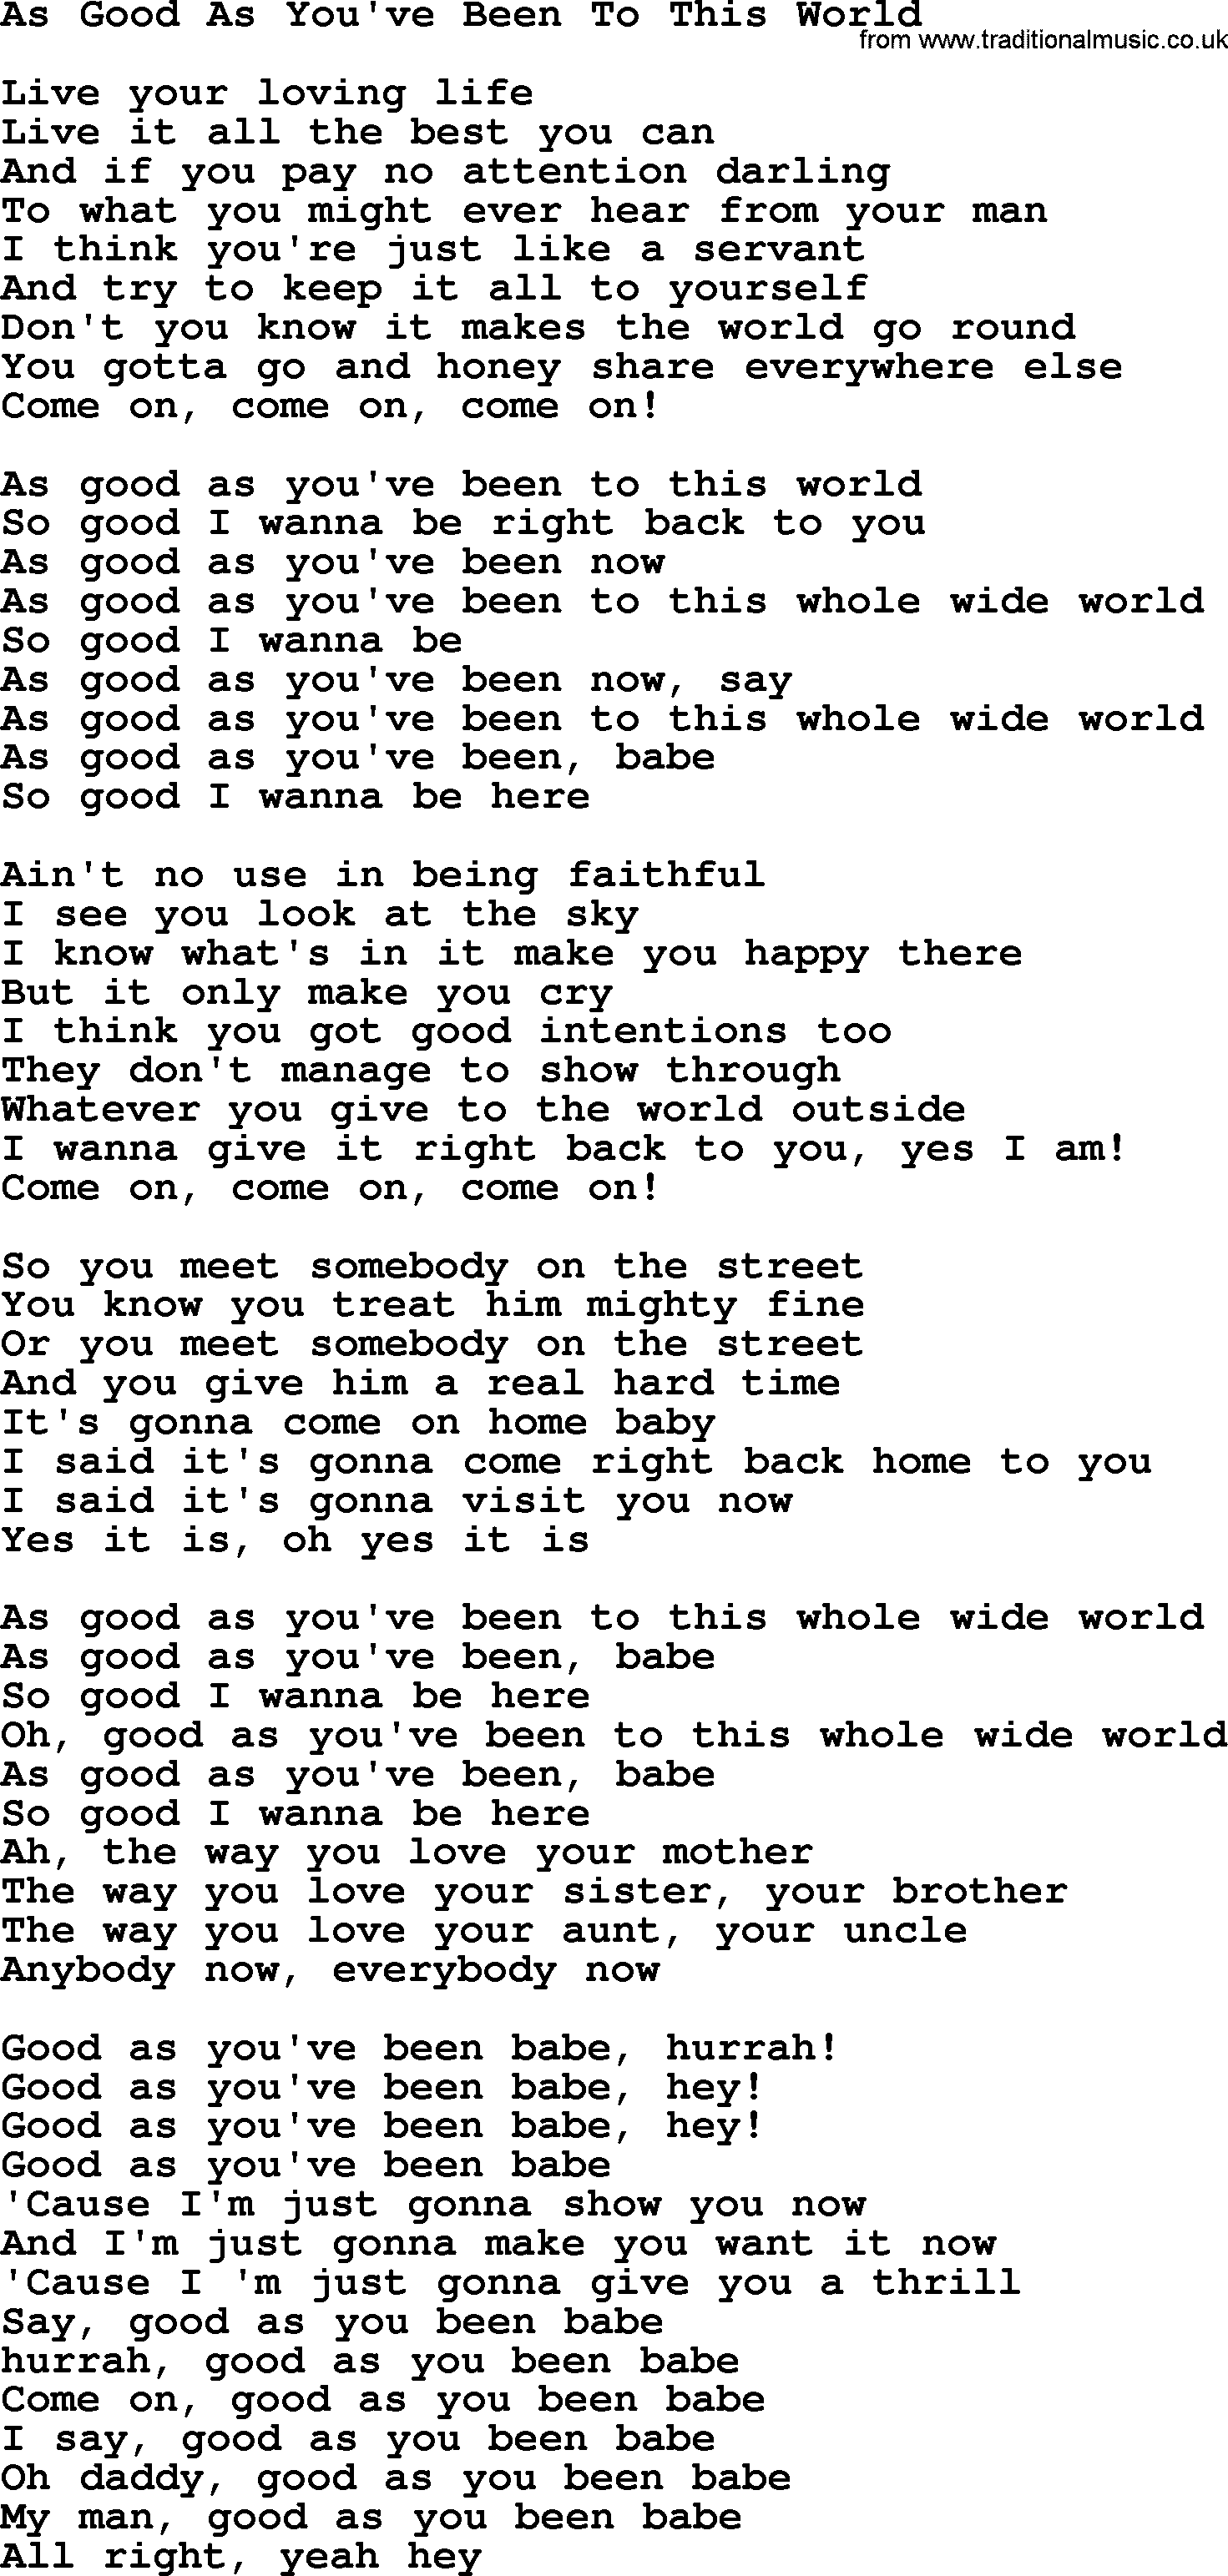 The Byrds song As Good As You've Been To This World, lyrics